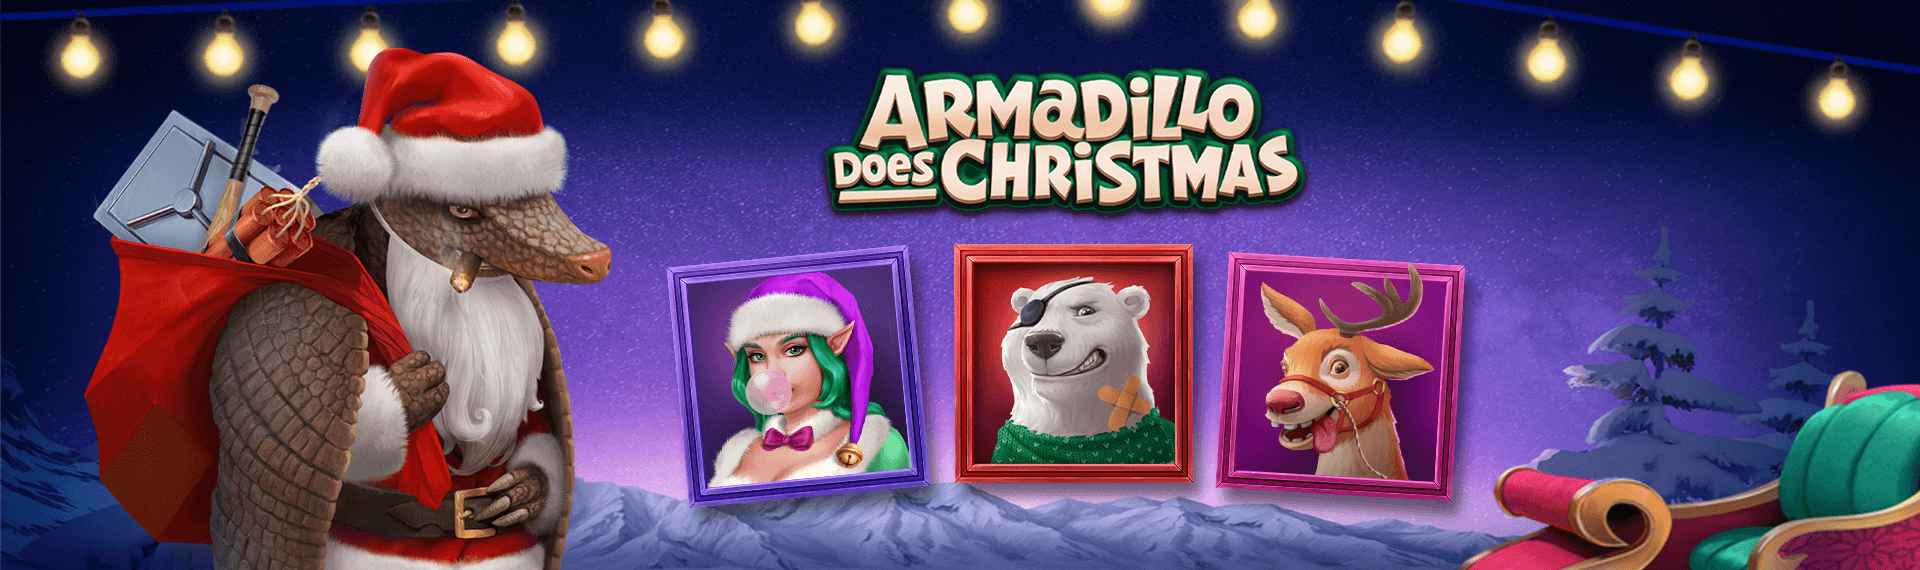 Armadillo Does Christmas Screenshot <br />
<b>Notice</b>:  Undefined variable: key in <b>/var/www/html/wp-content/themes/armadillo/page-game.php</b> on line <b>37</b><br />
1